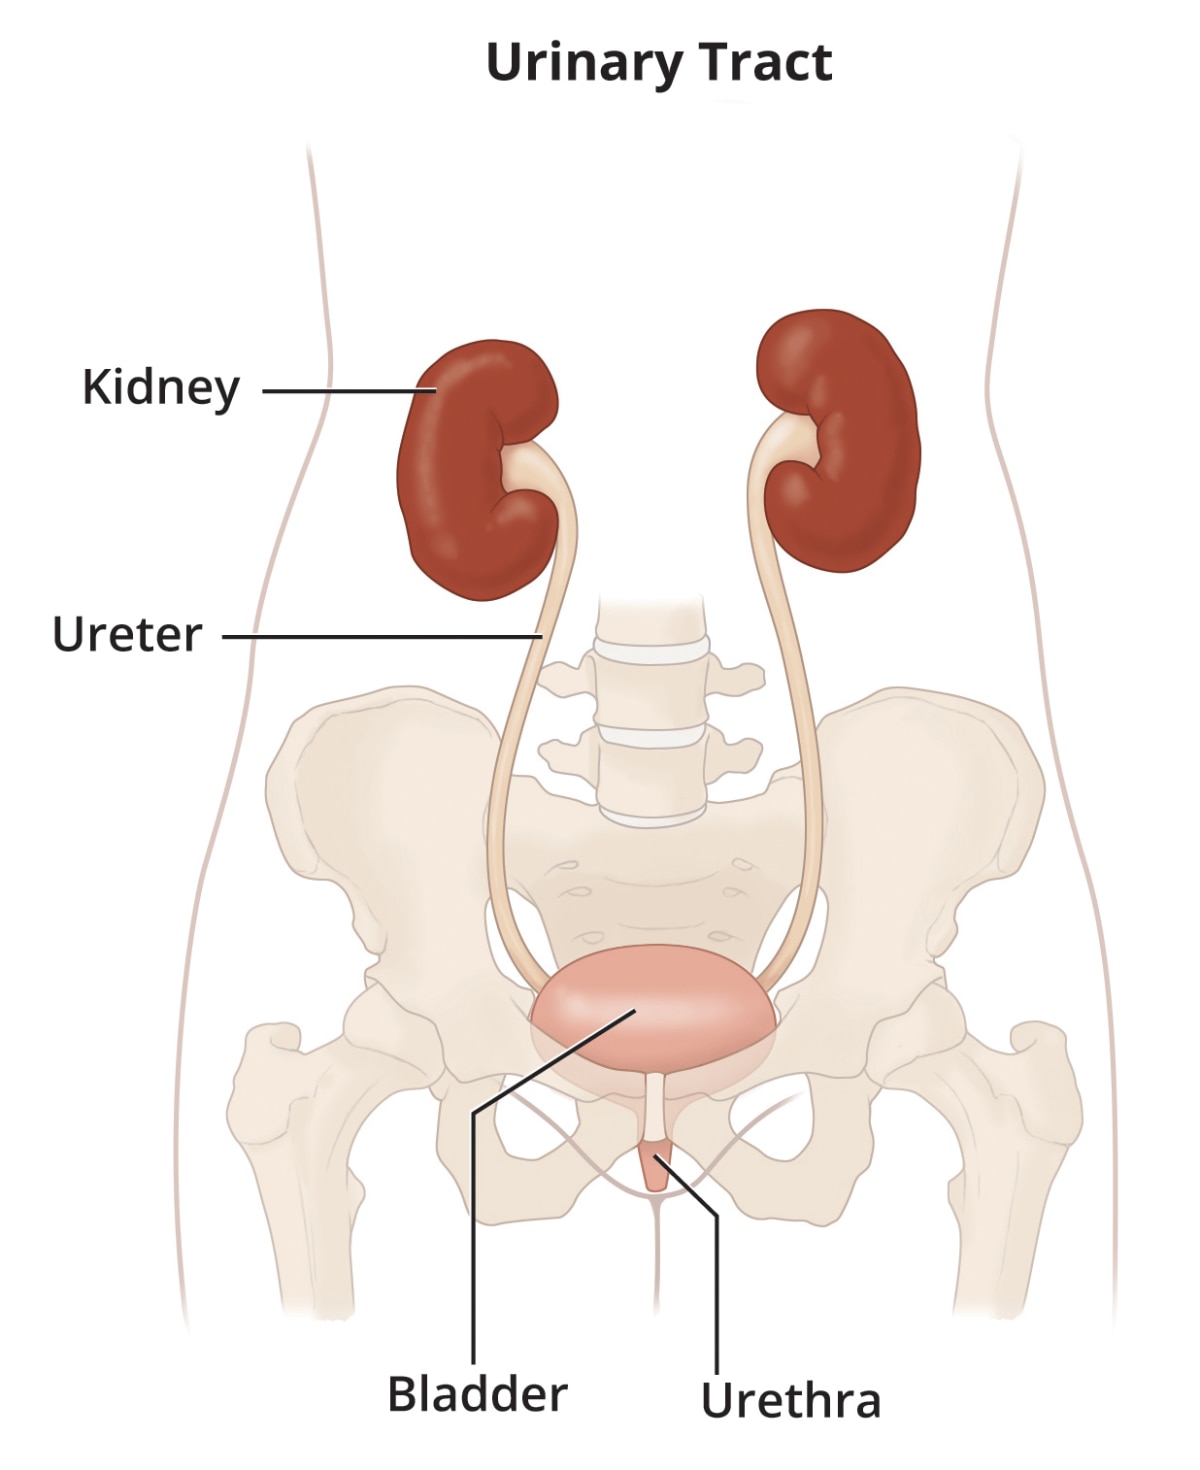 Illustration of the urinary tract, including the kidneys, ureters, bladder, and urethra.